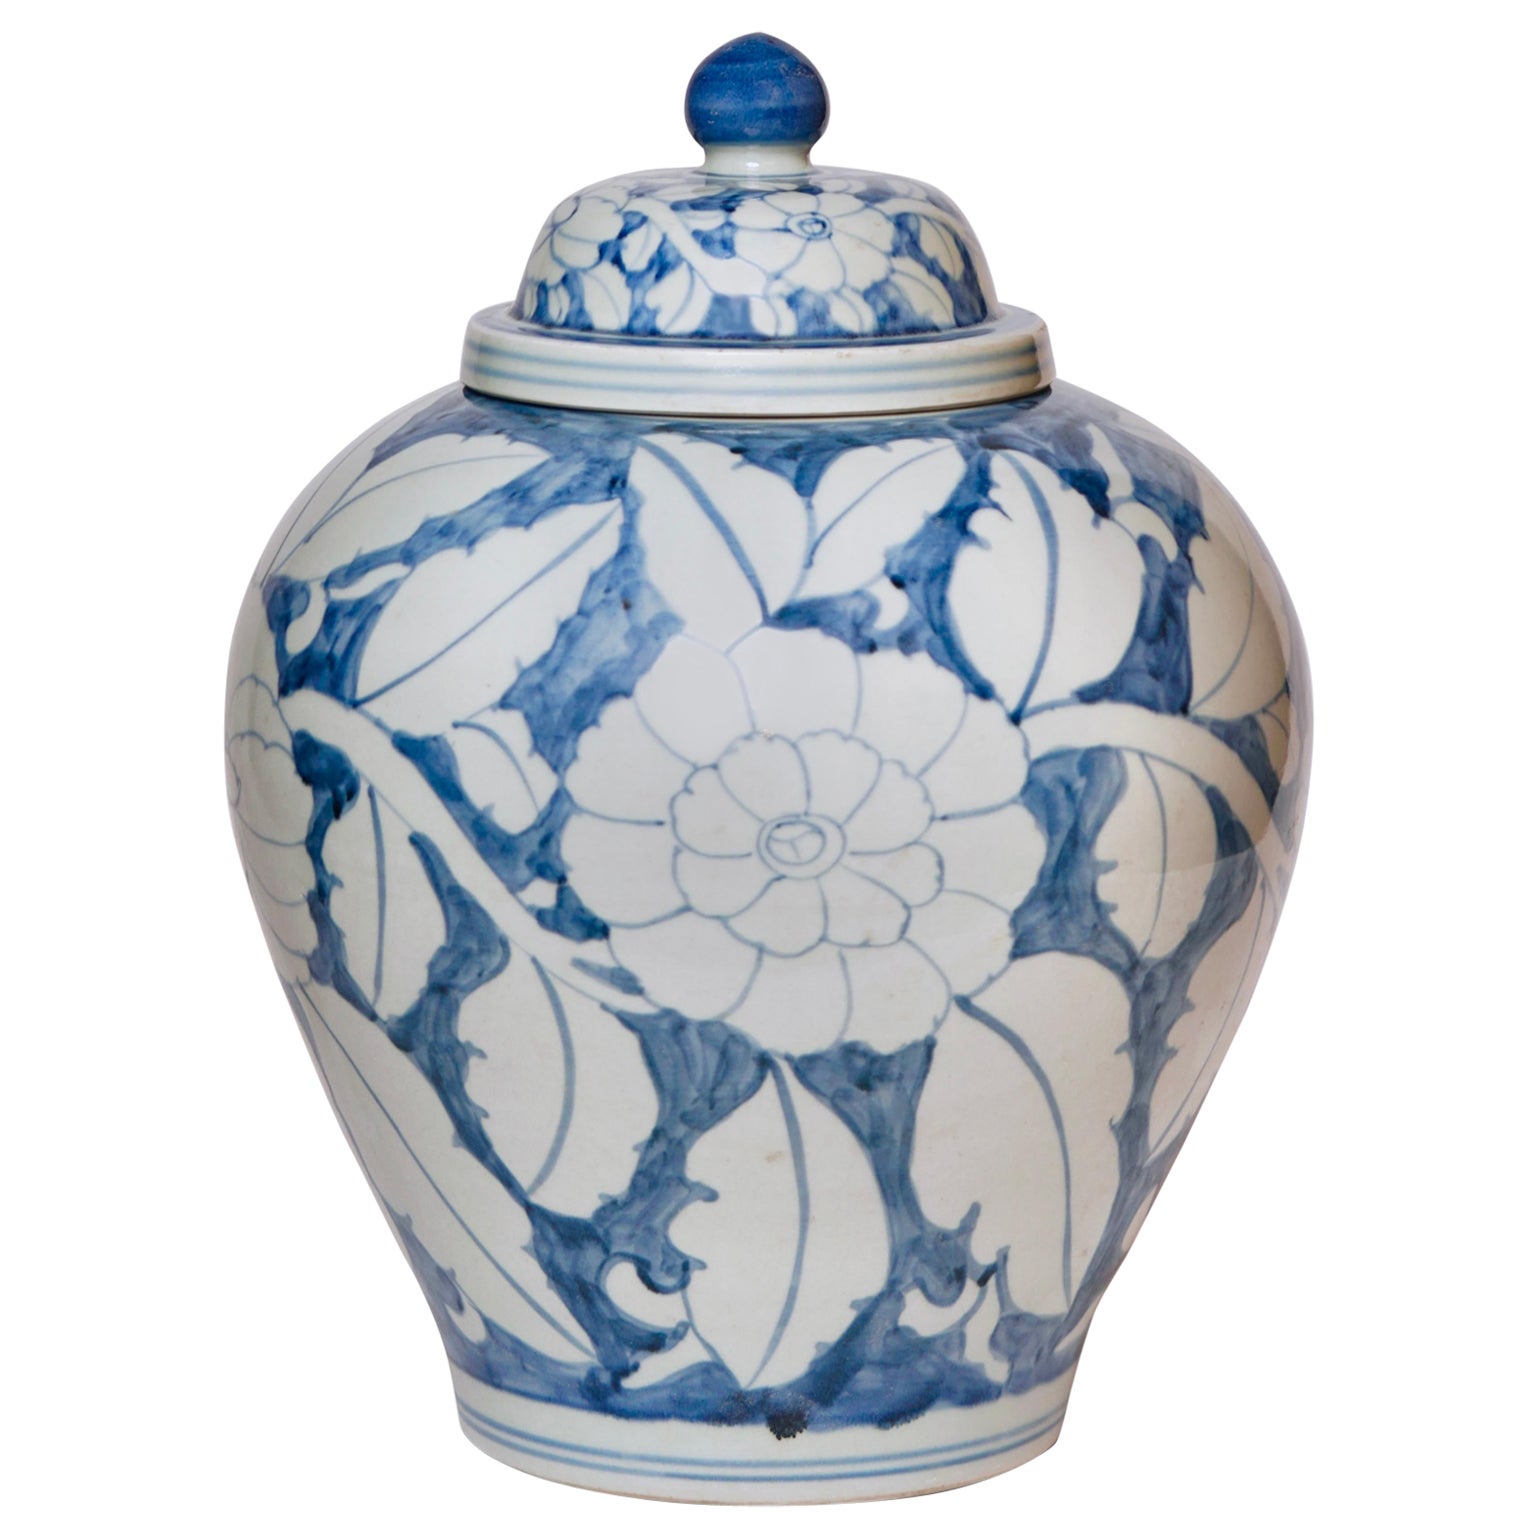 Rustic Peony Blue and White Porcelain Temple Jar For Sale